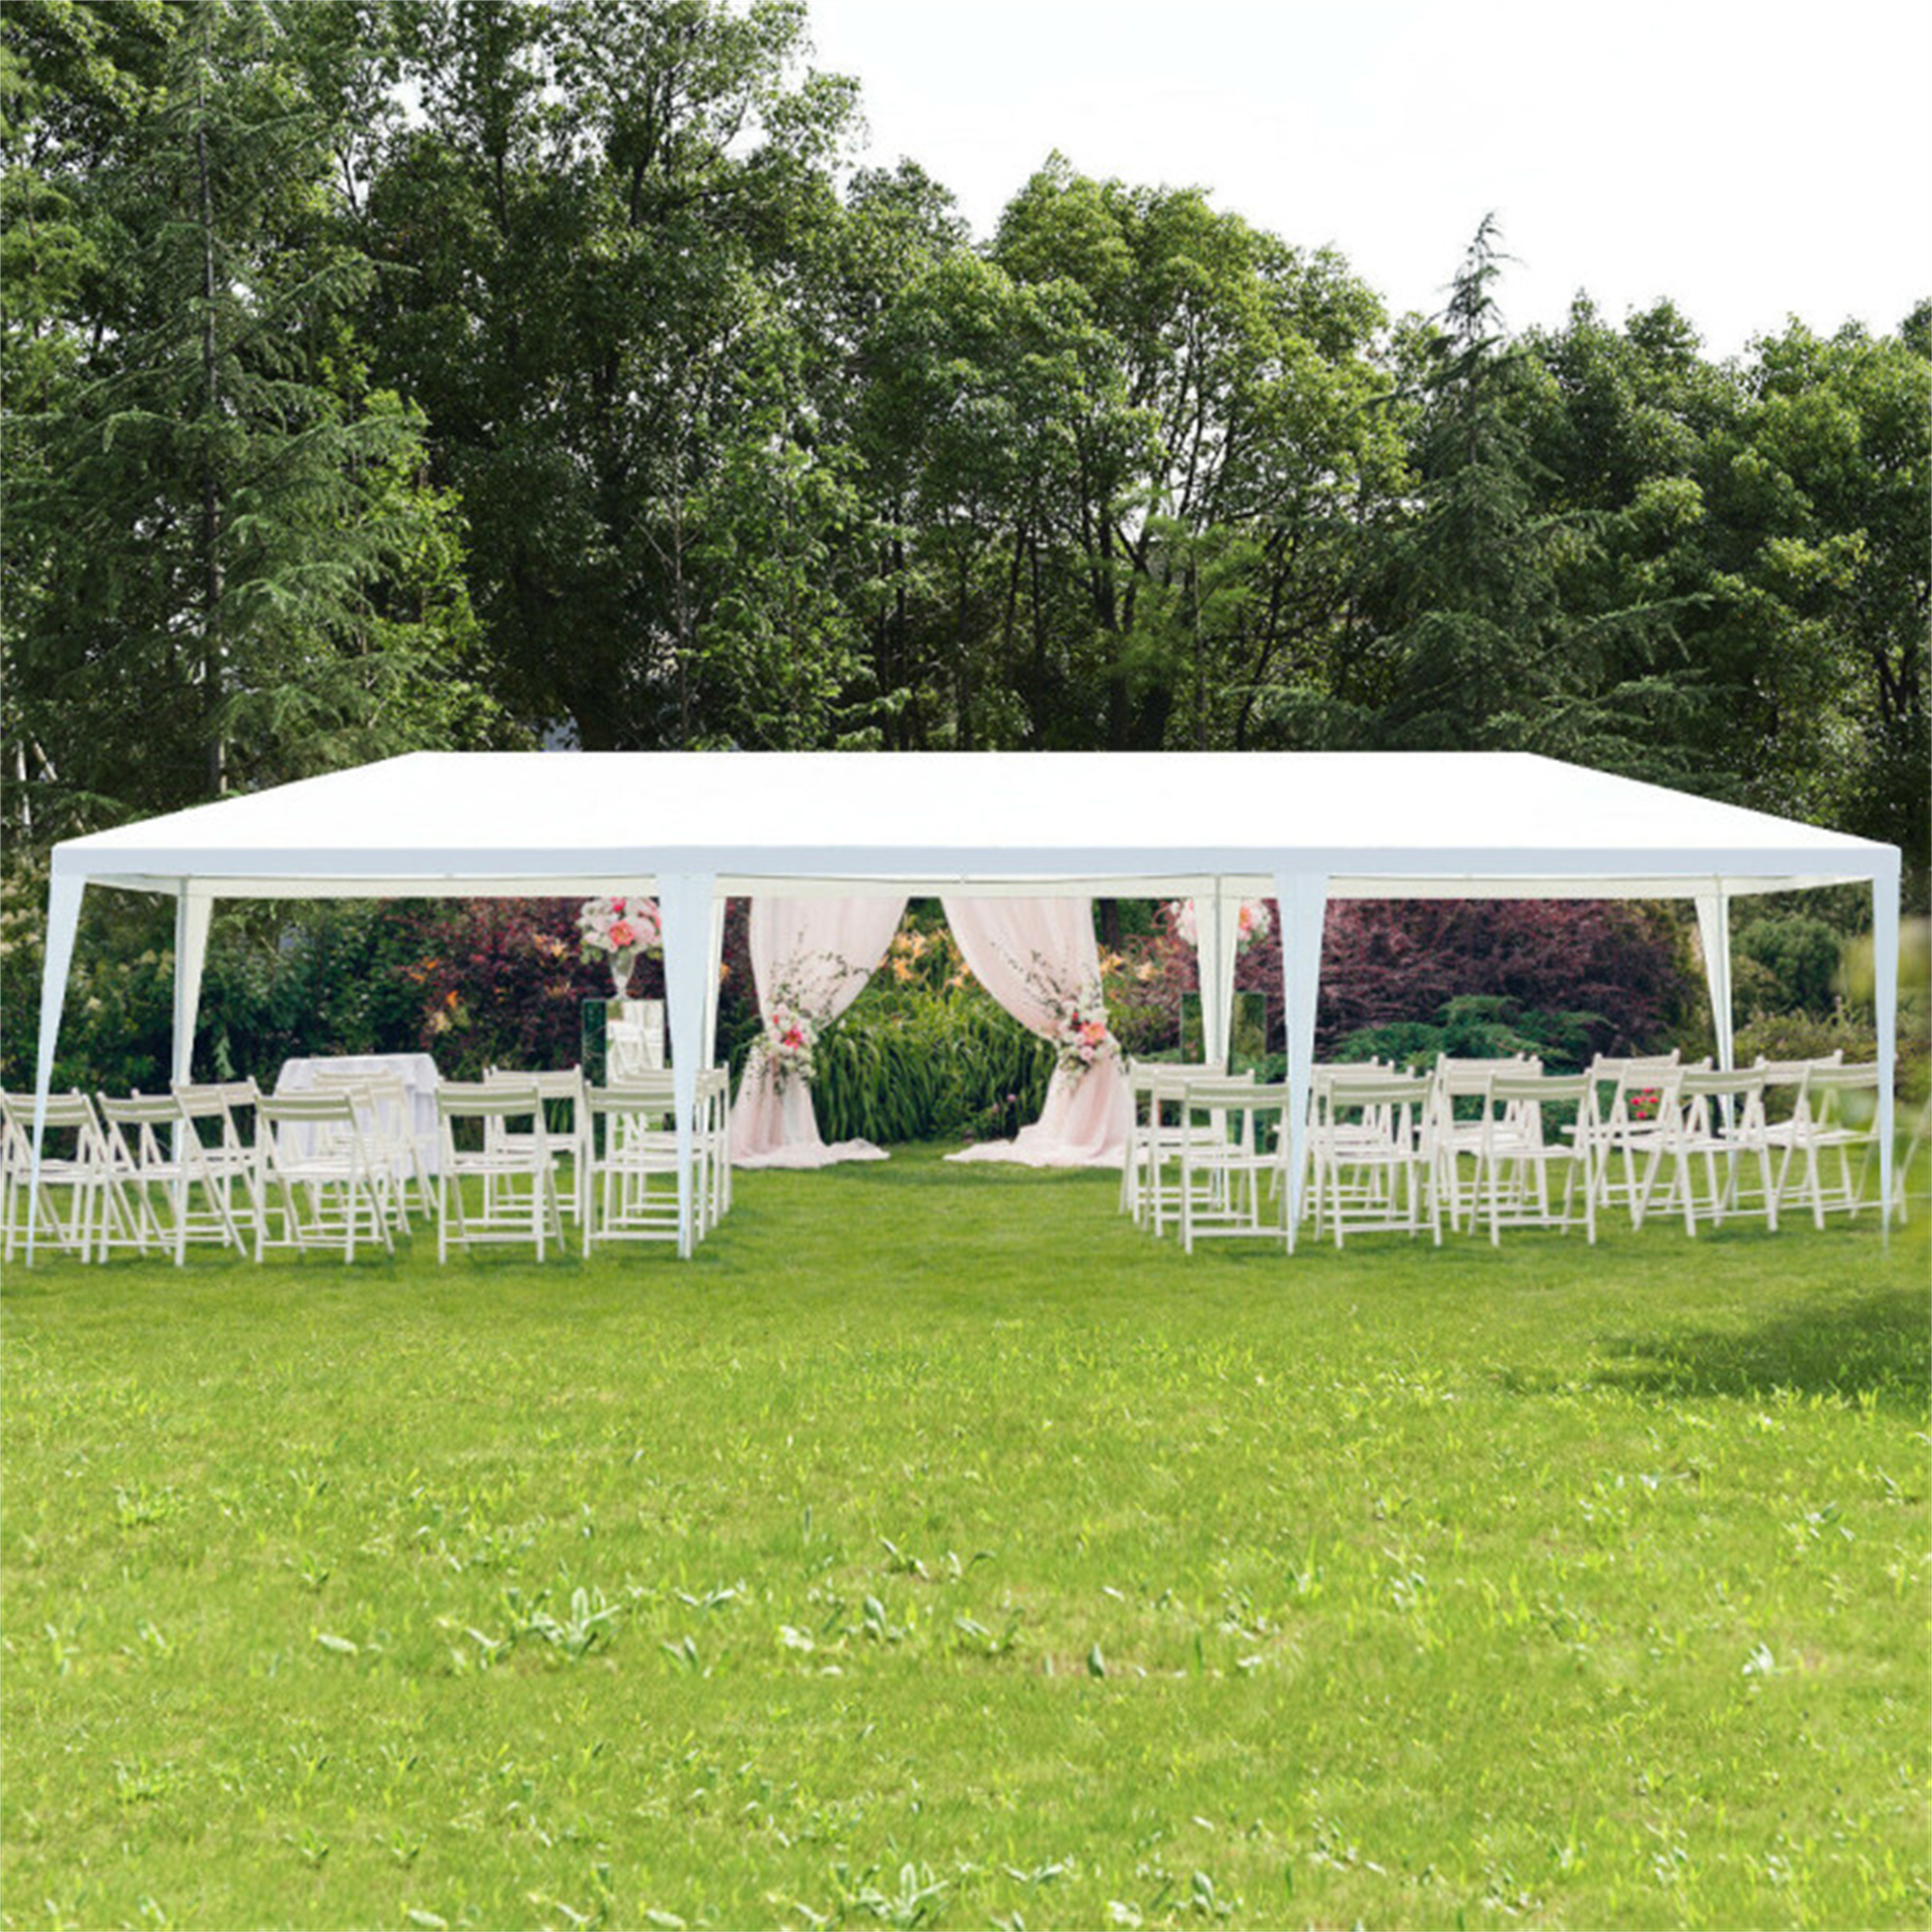 10 x 30 Feet Waterproof Gazebo Canopy Tent with Connection Stakes for